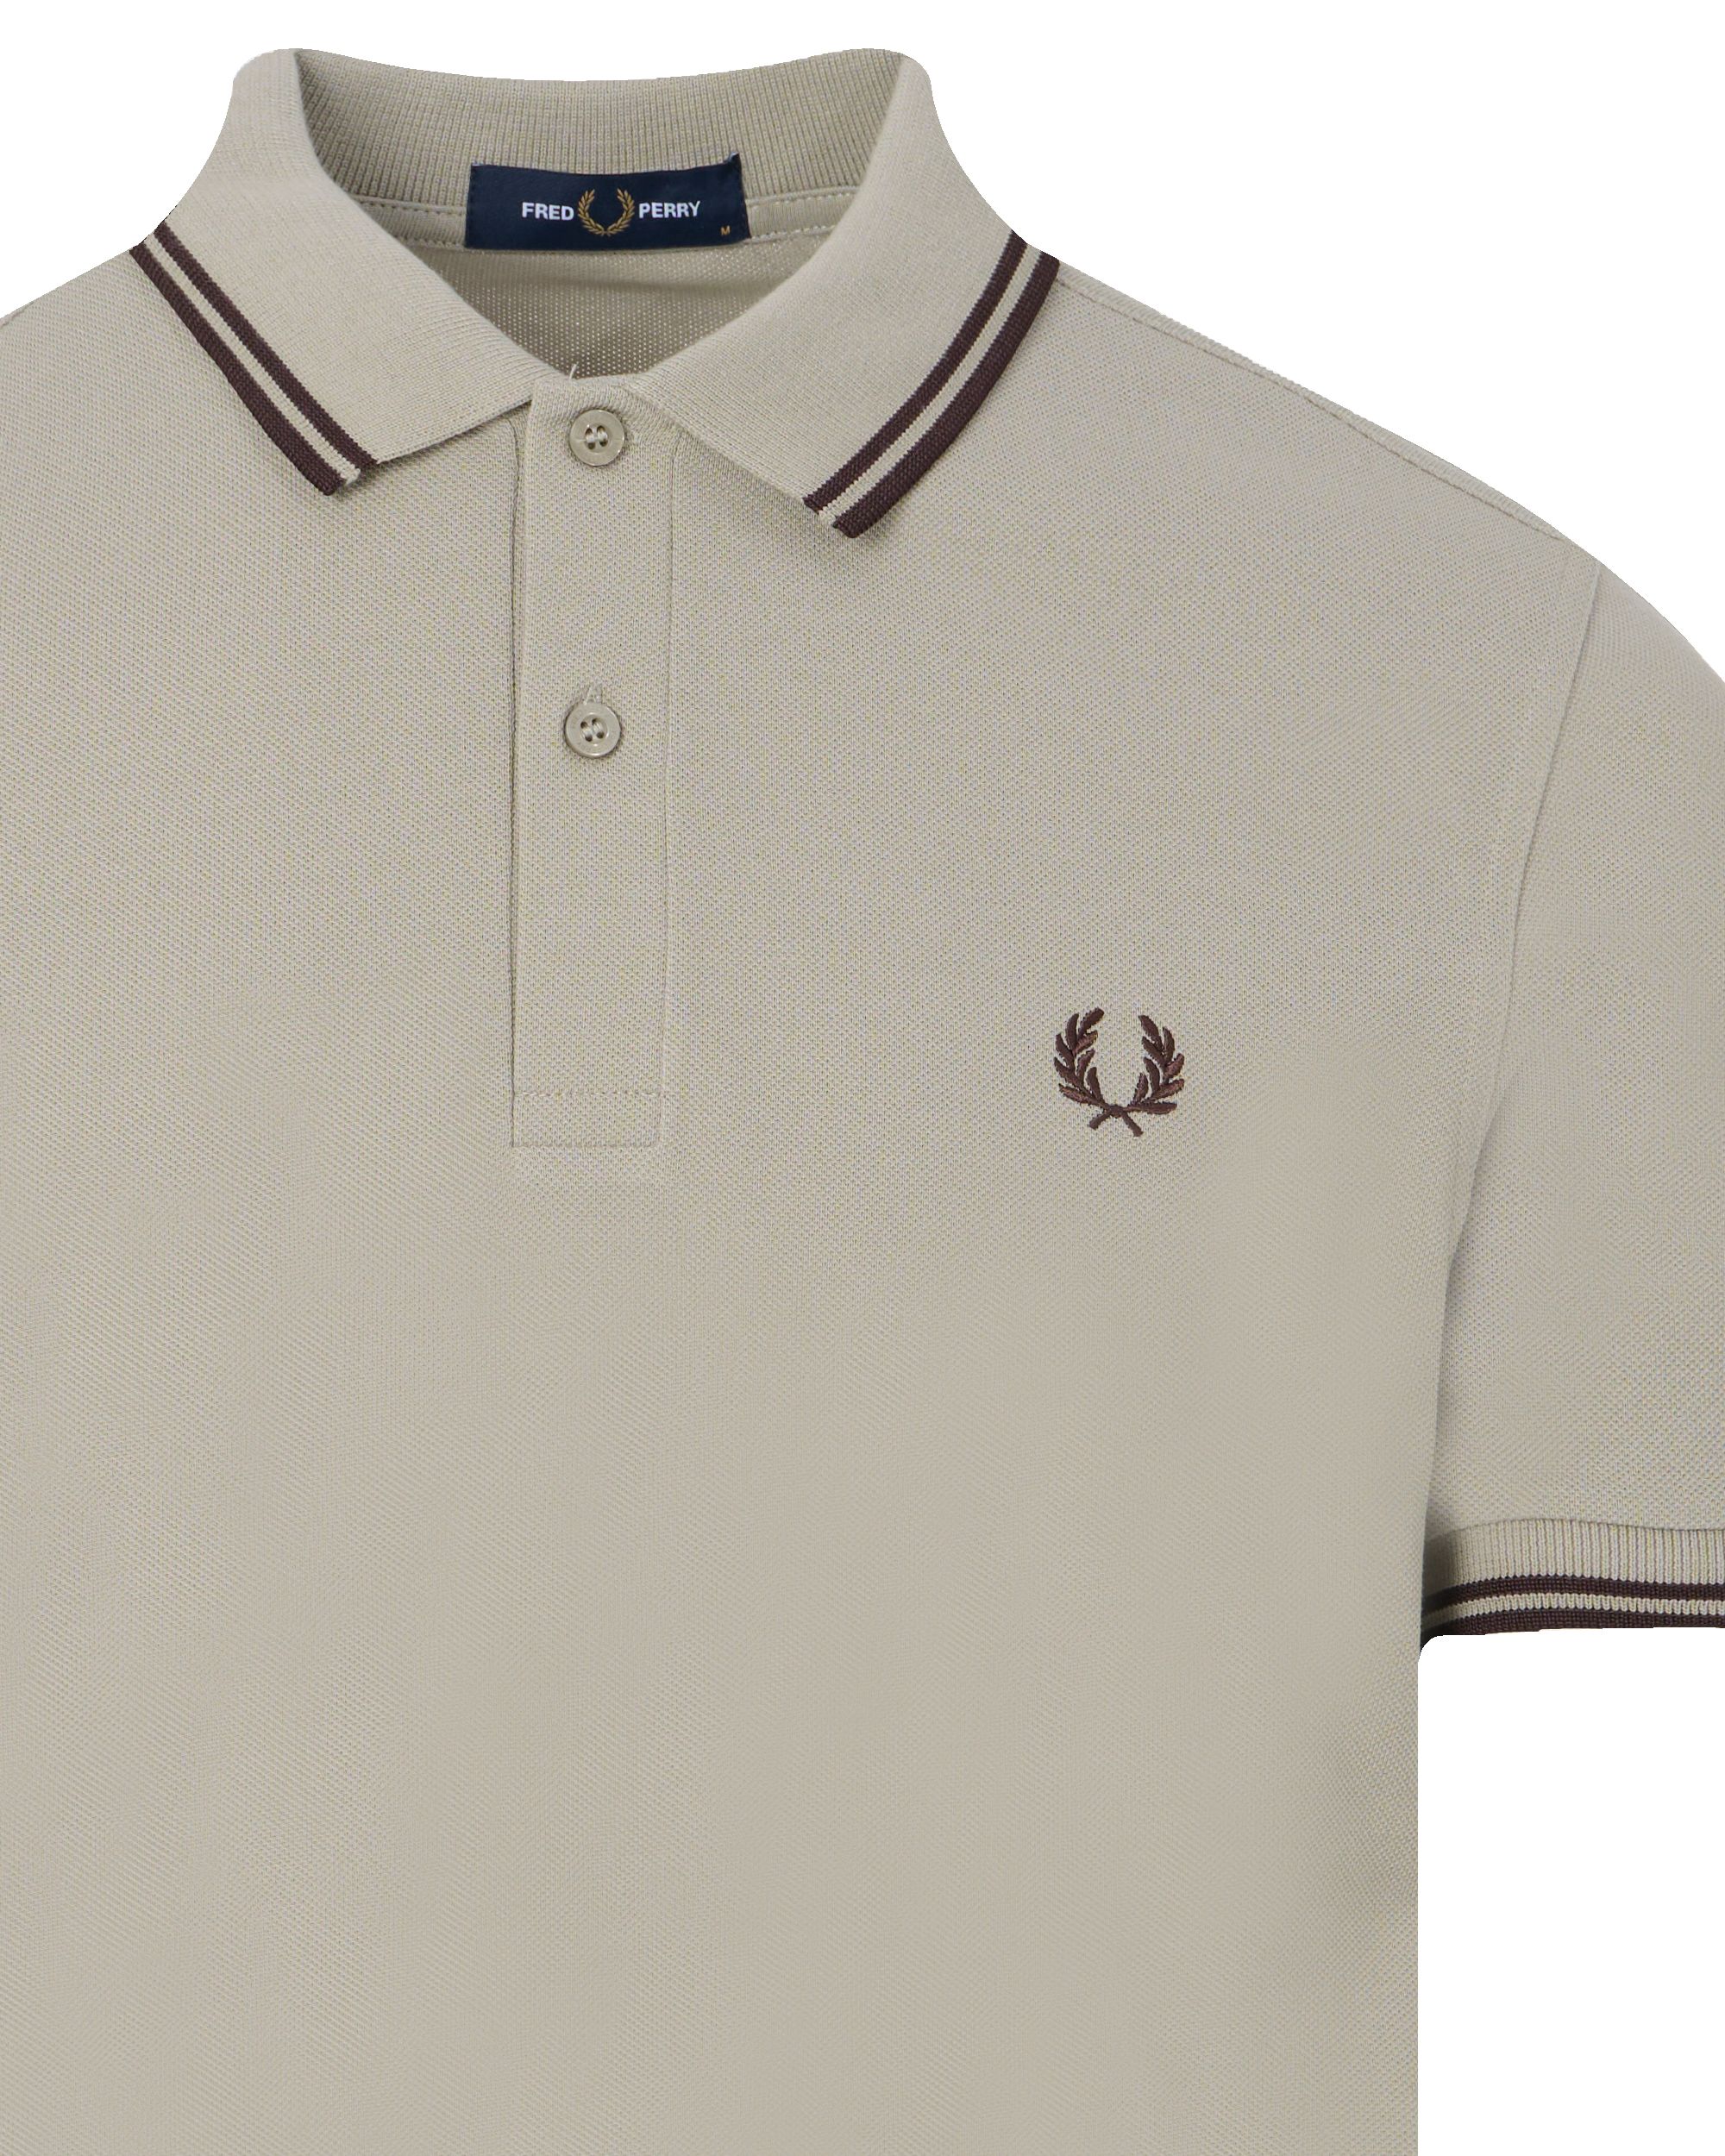 Fred Perry Polo KM Grijs 091951-001-XL